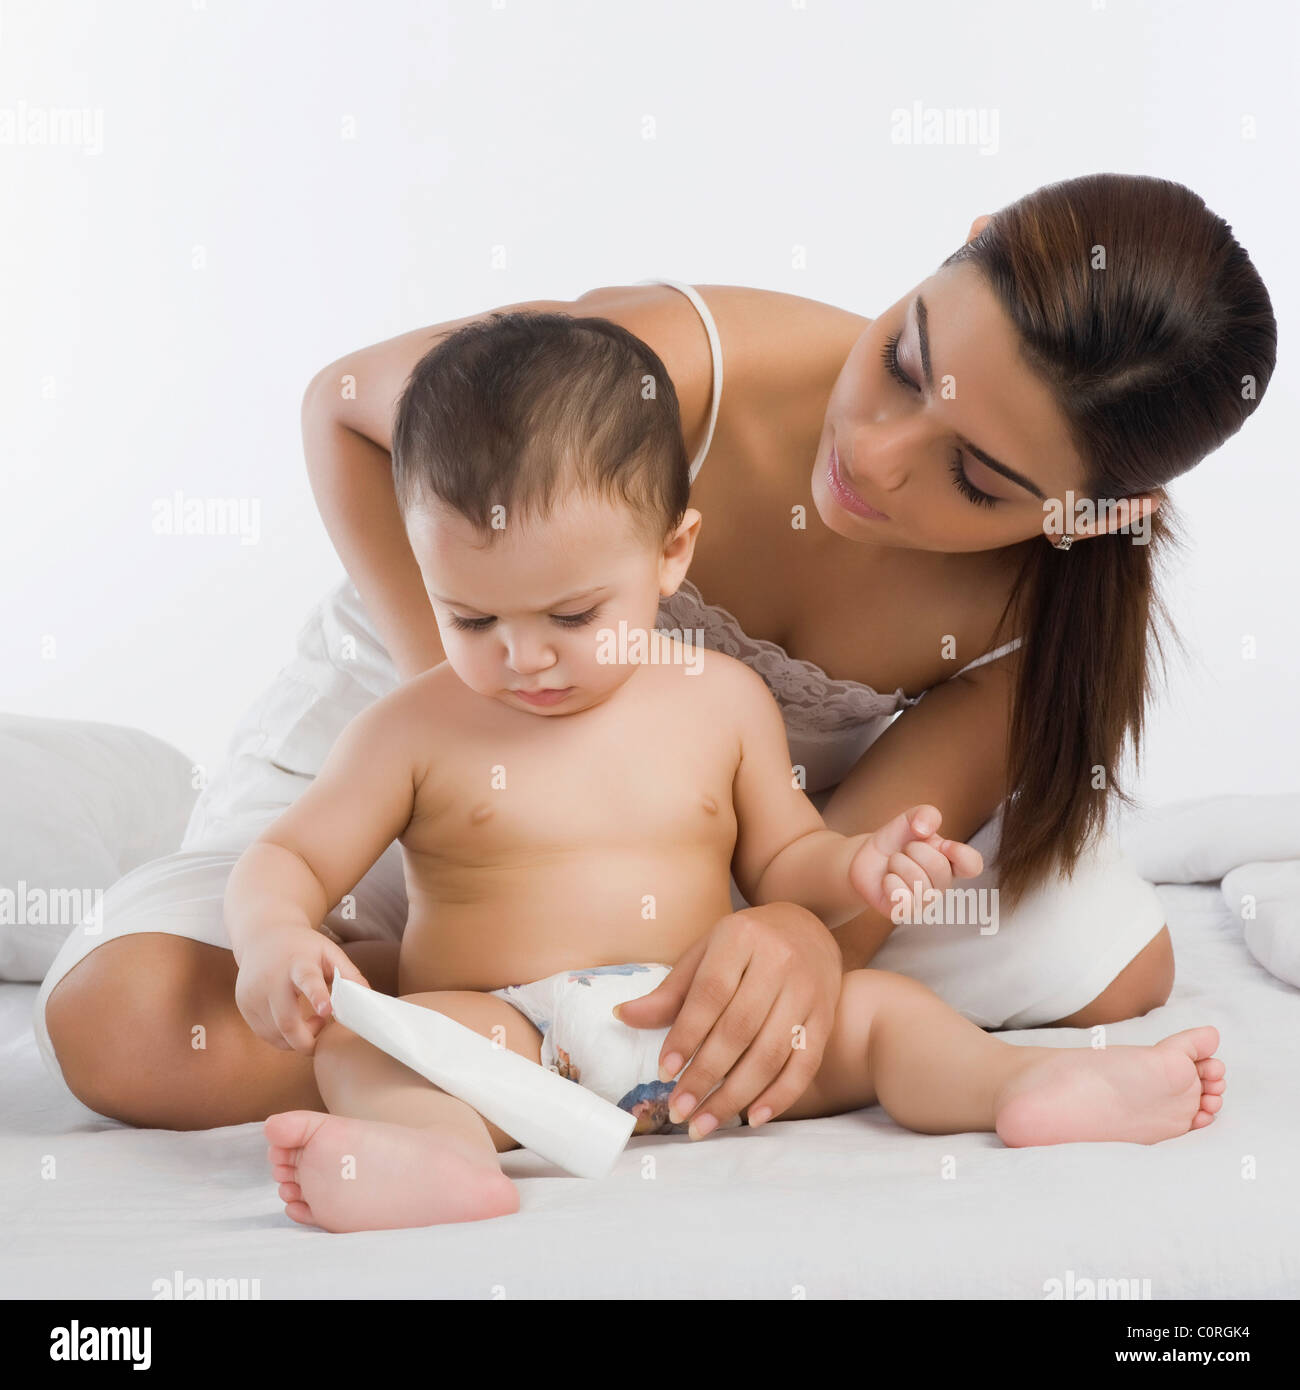 Woman playing with her son on the bed Stock Photo